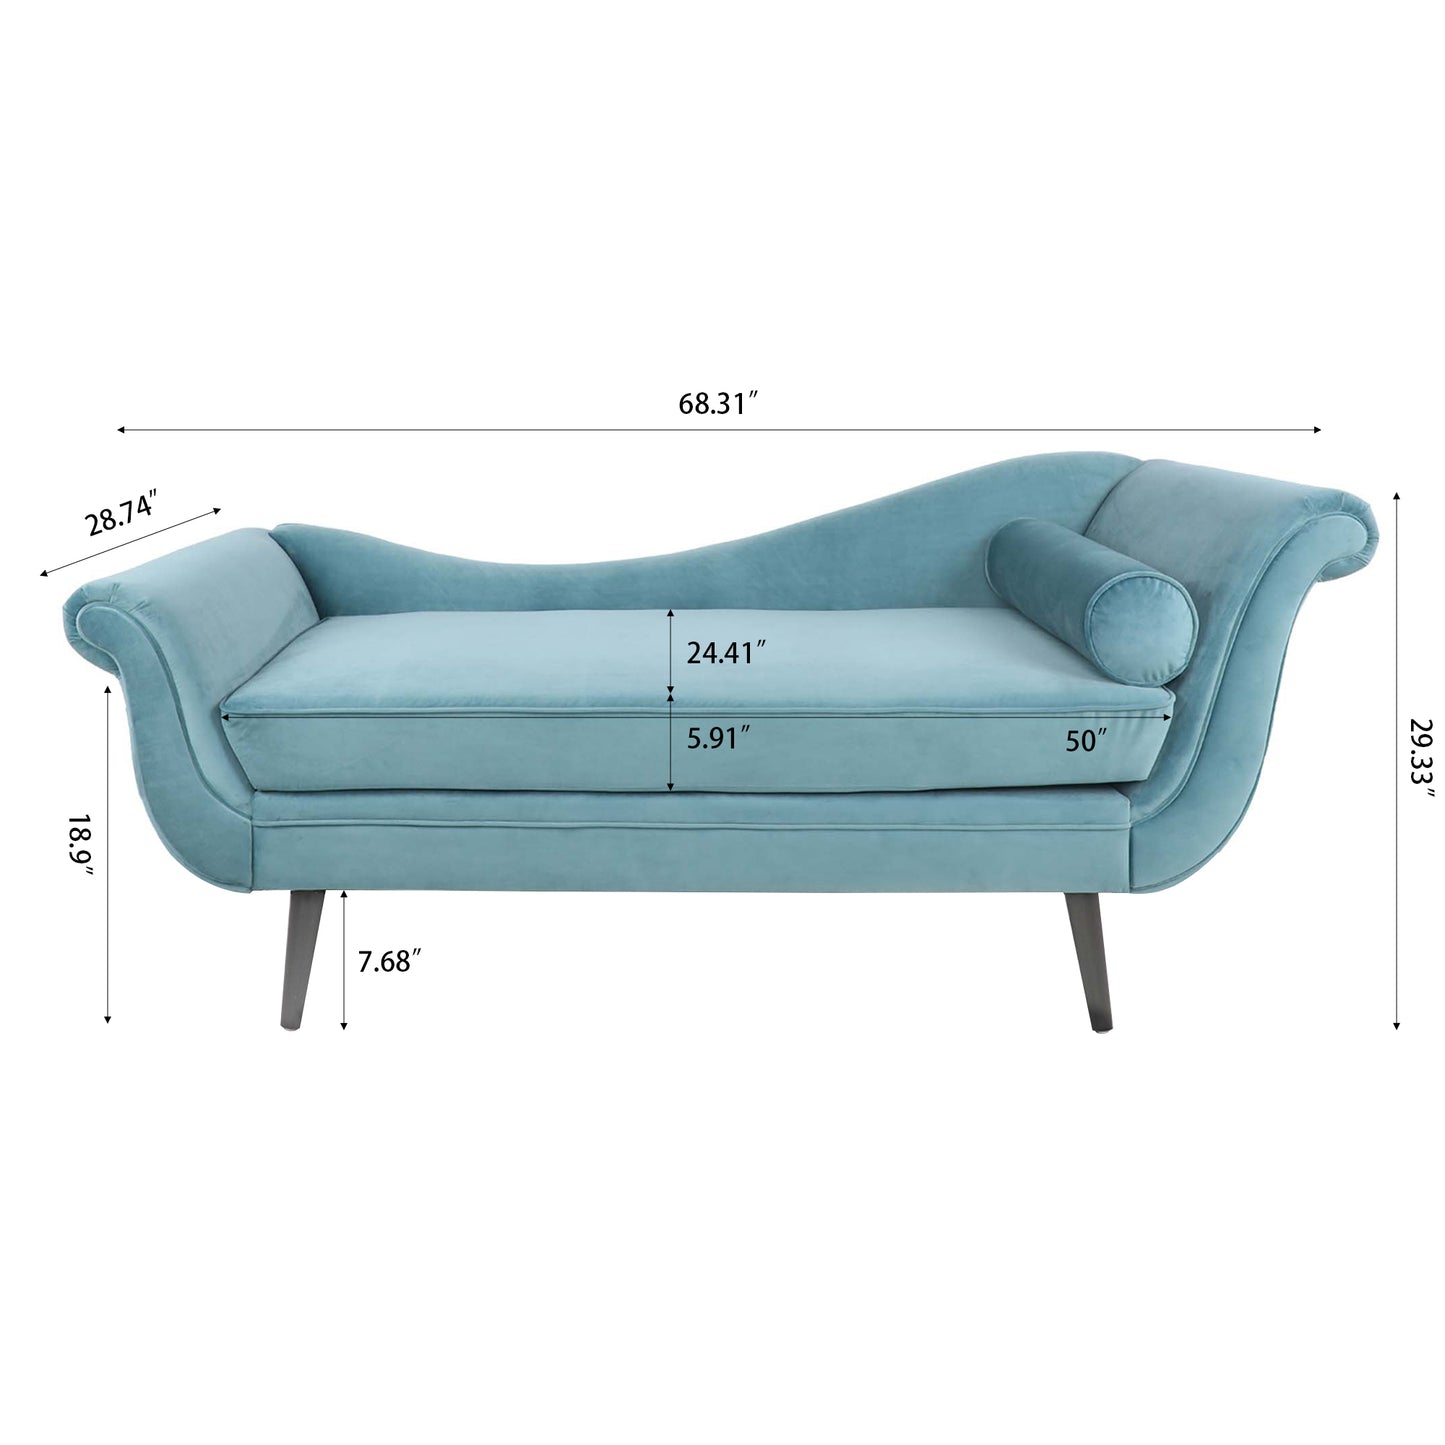 Chaise Lounge with Scroll Arms - Elegant and Comfortable Seating for Your Home, Office or Patio - Available in Various Colors and Sizes